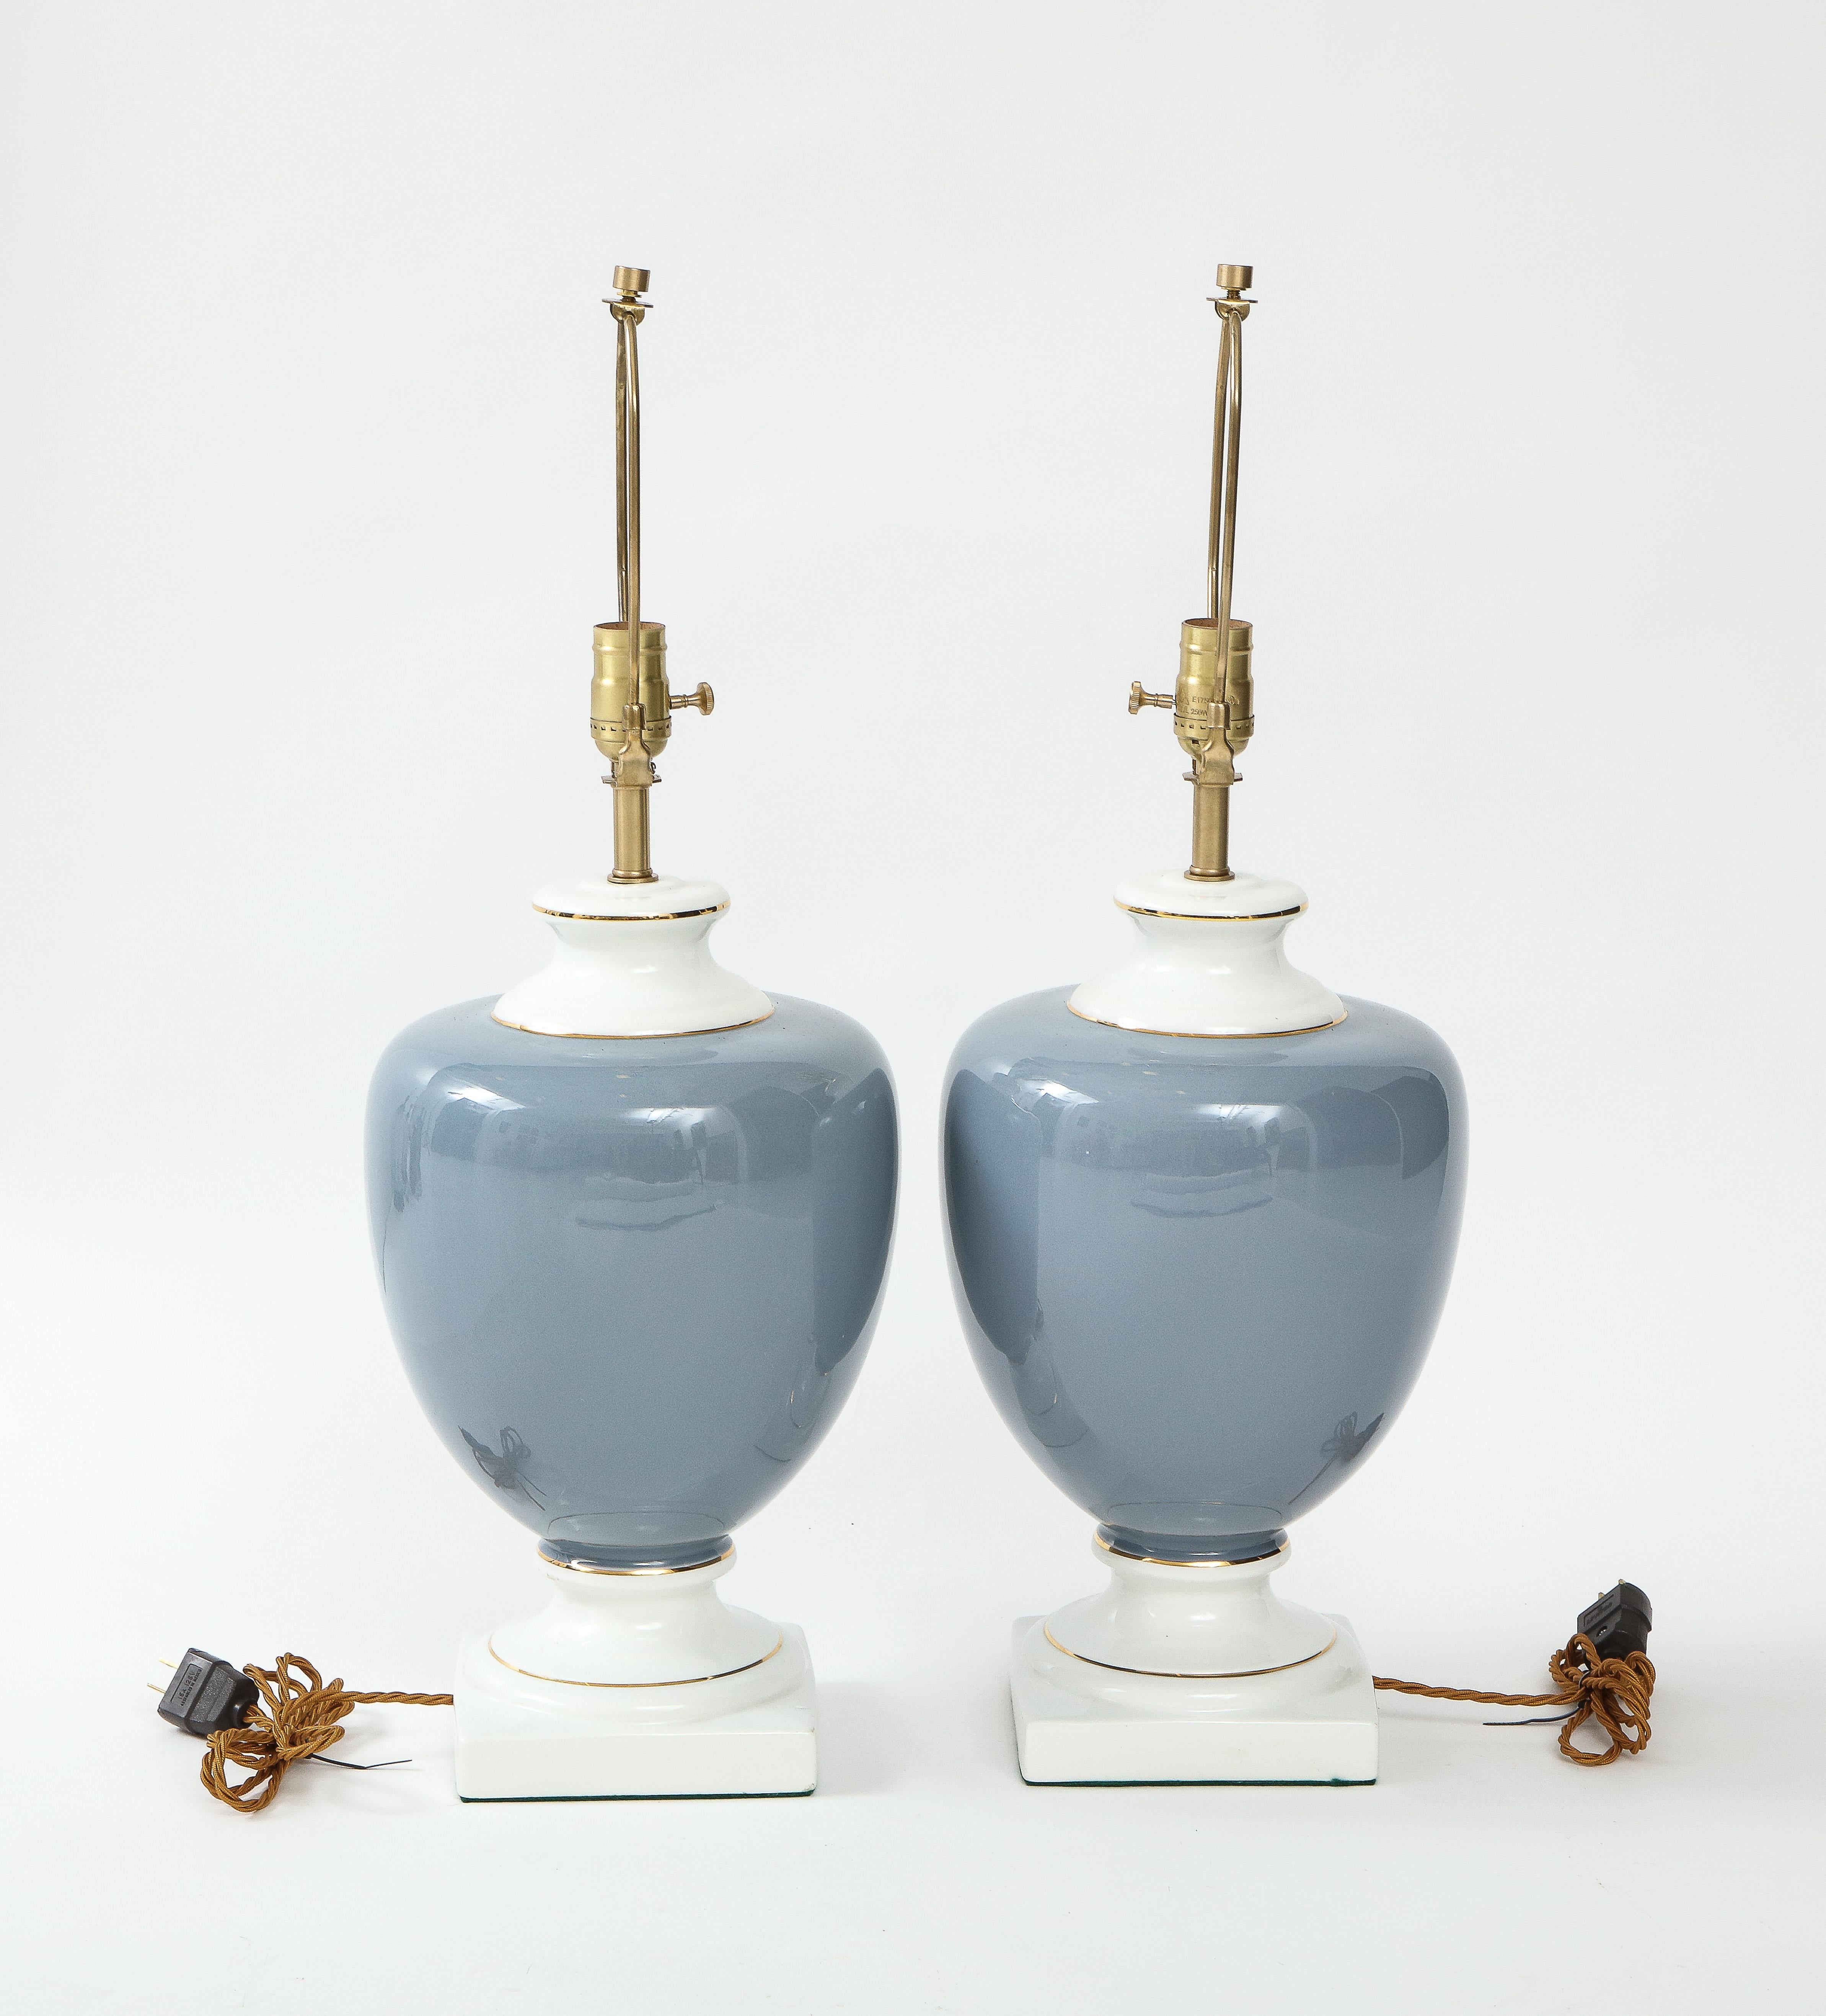 Pair of Neoclassical Urn shaped porcelain lamps featuring a french blue color and 22kt gold pinstripe detail. Lamps have been rewired to USA standards, 100W max bulbs. Square base measures 6